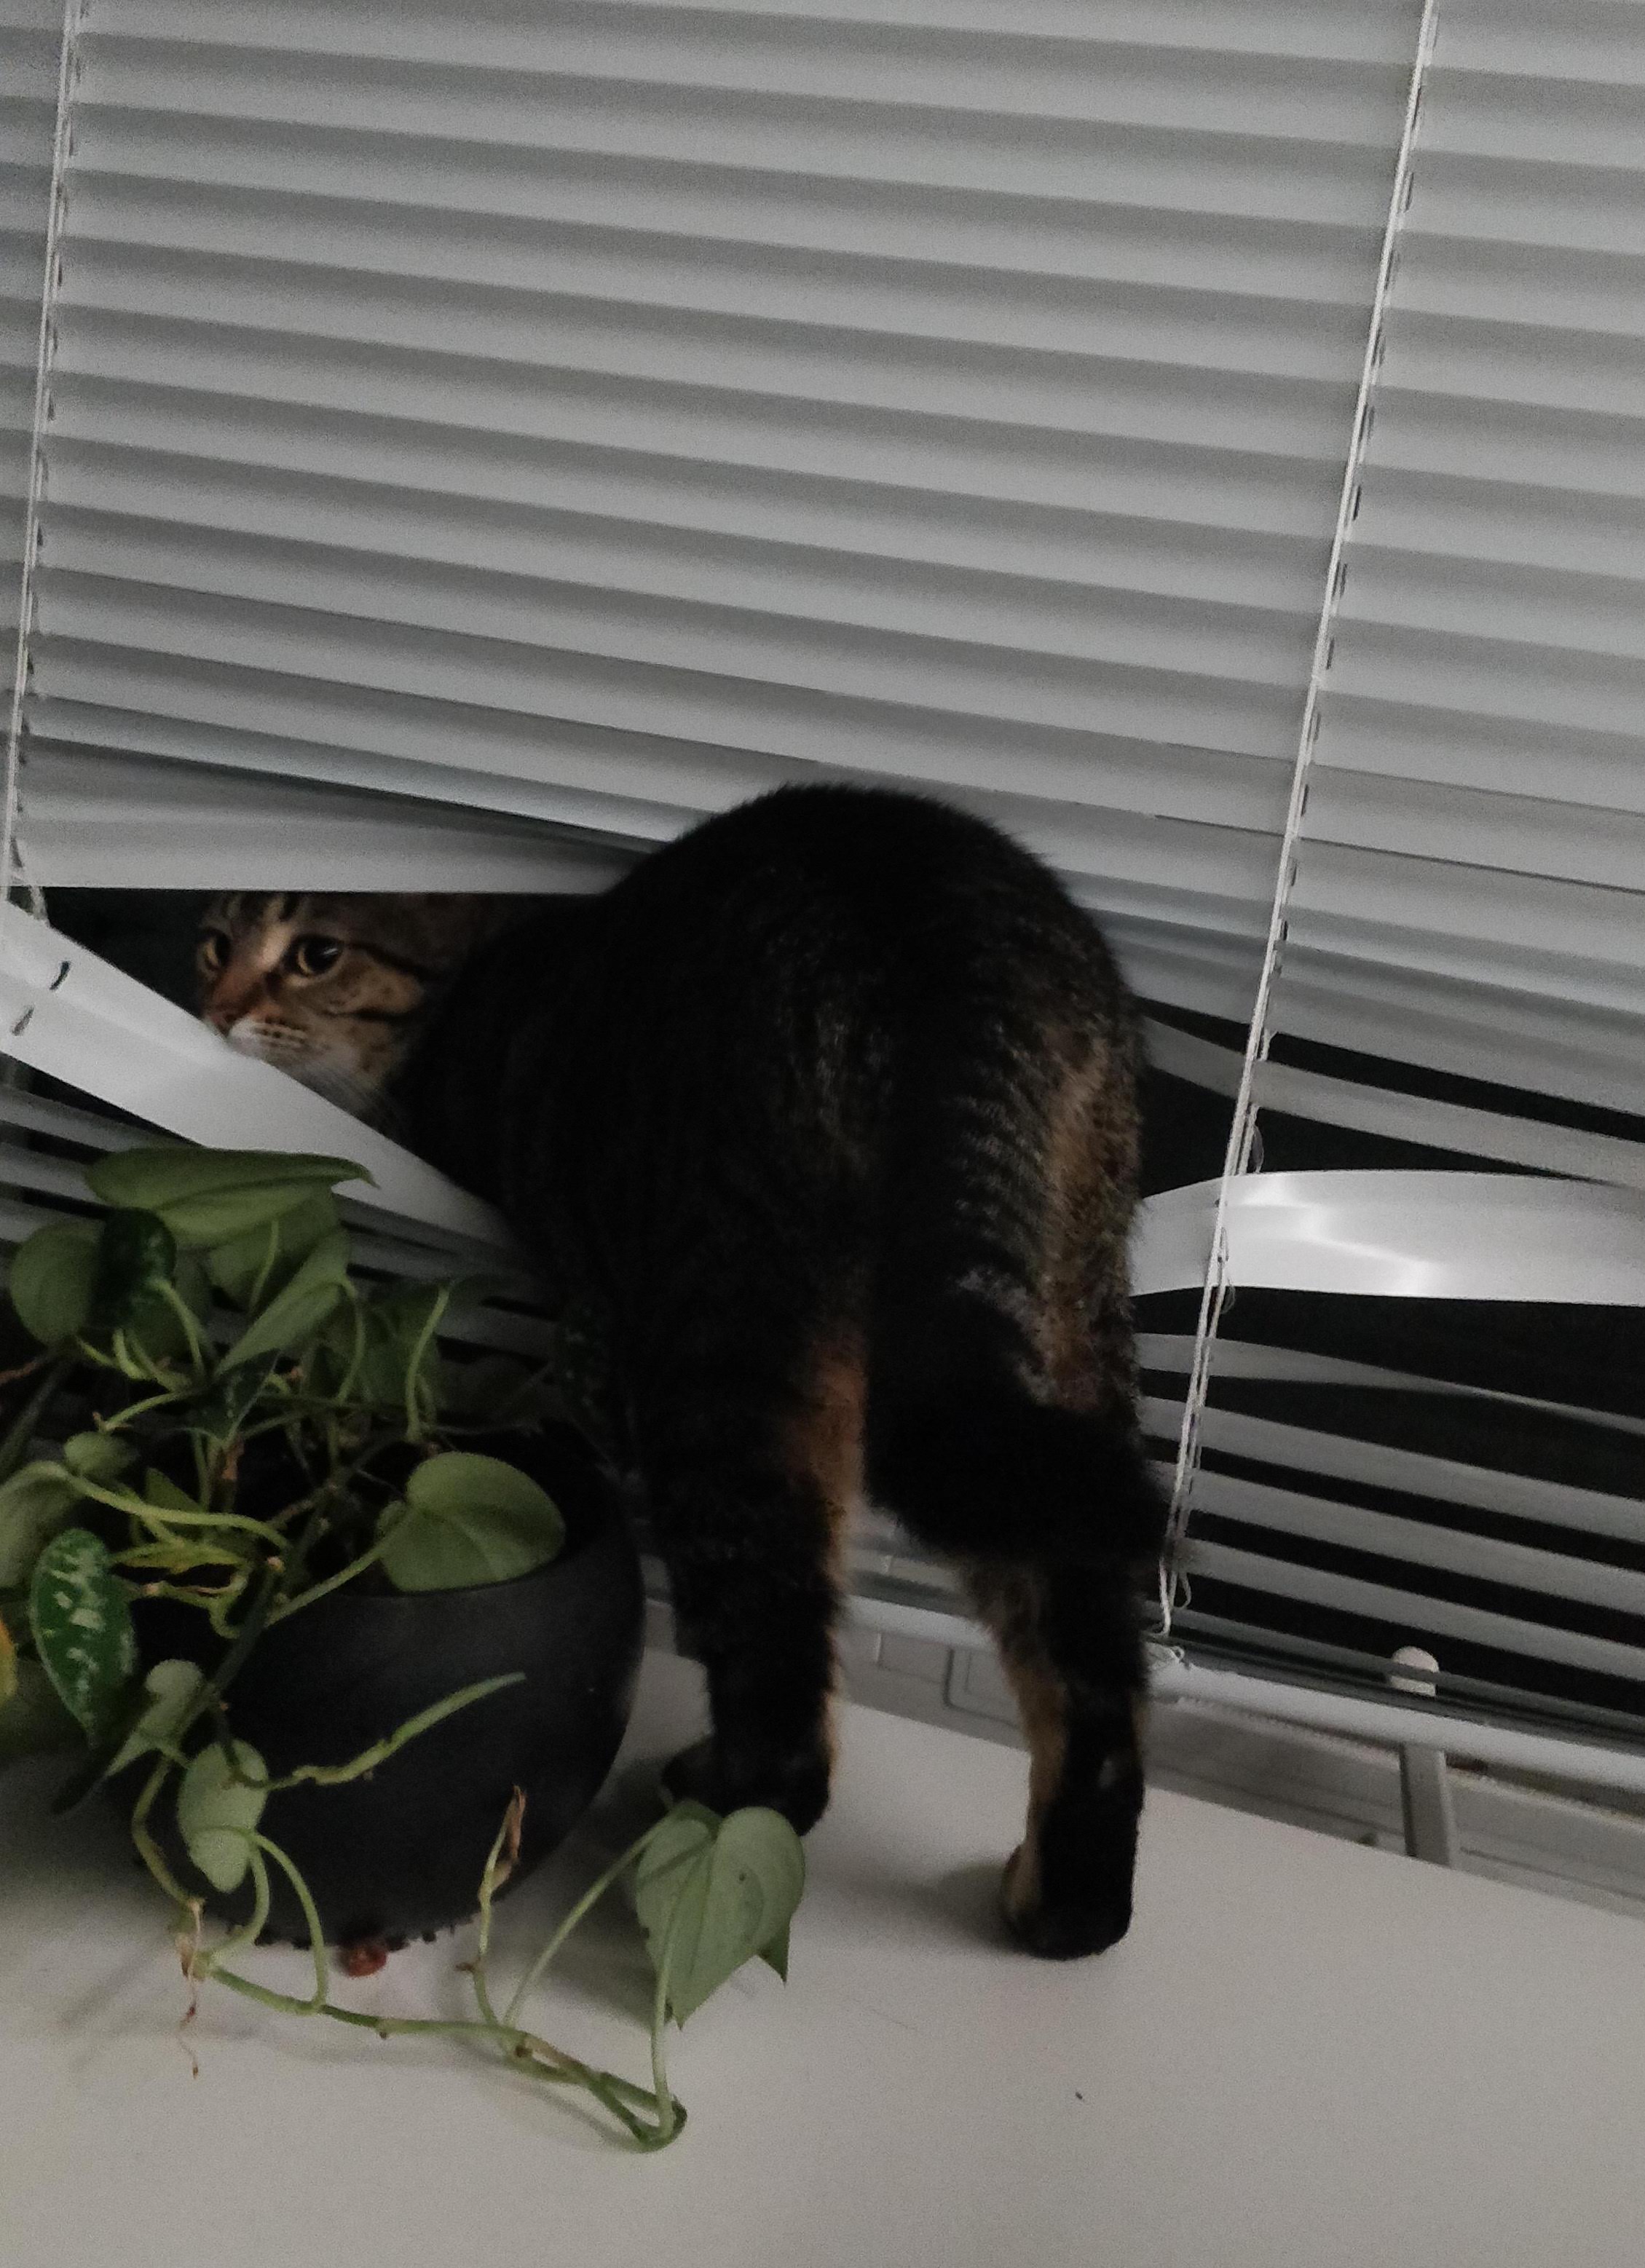 A photo of a cat stuck in the window blinds, turning to look over her shoulder with a pothos plant in the foreground.